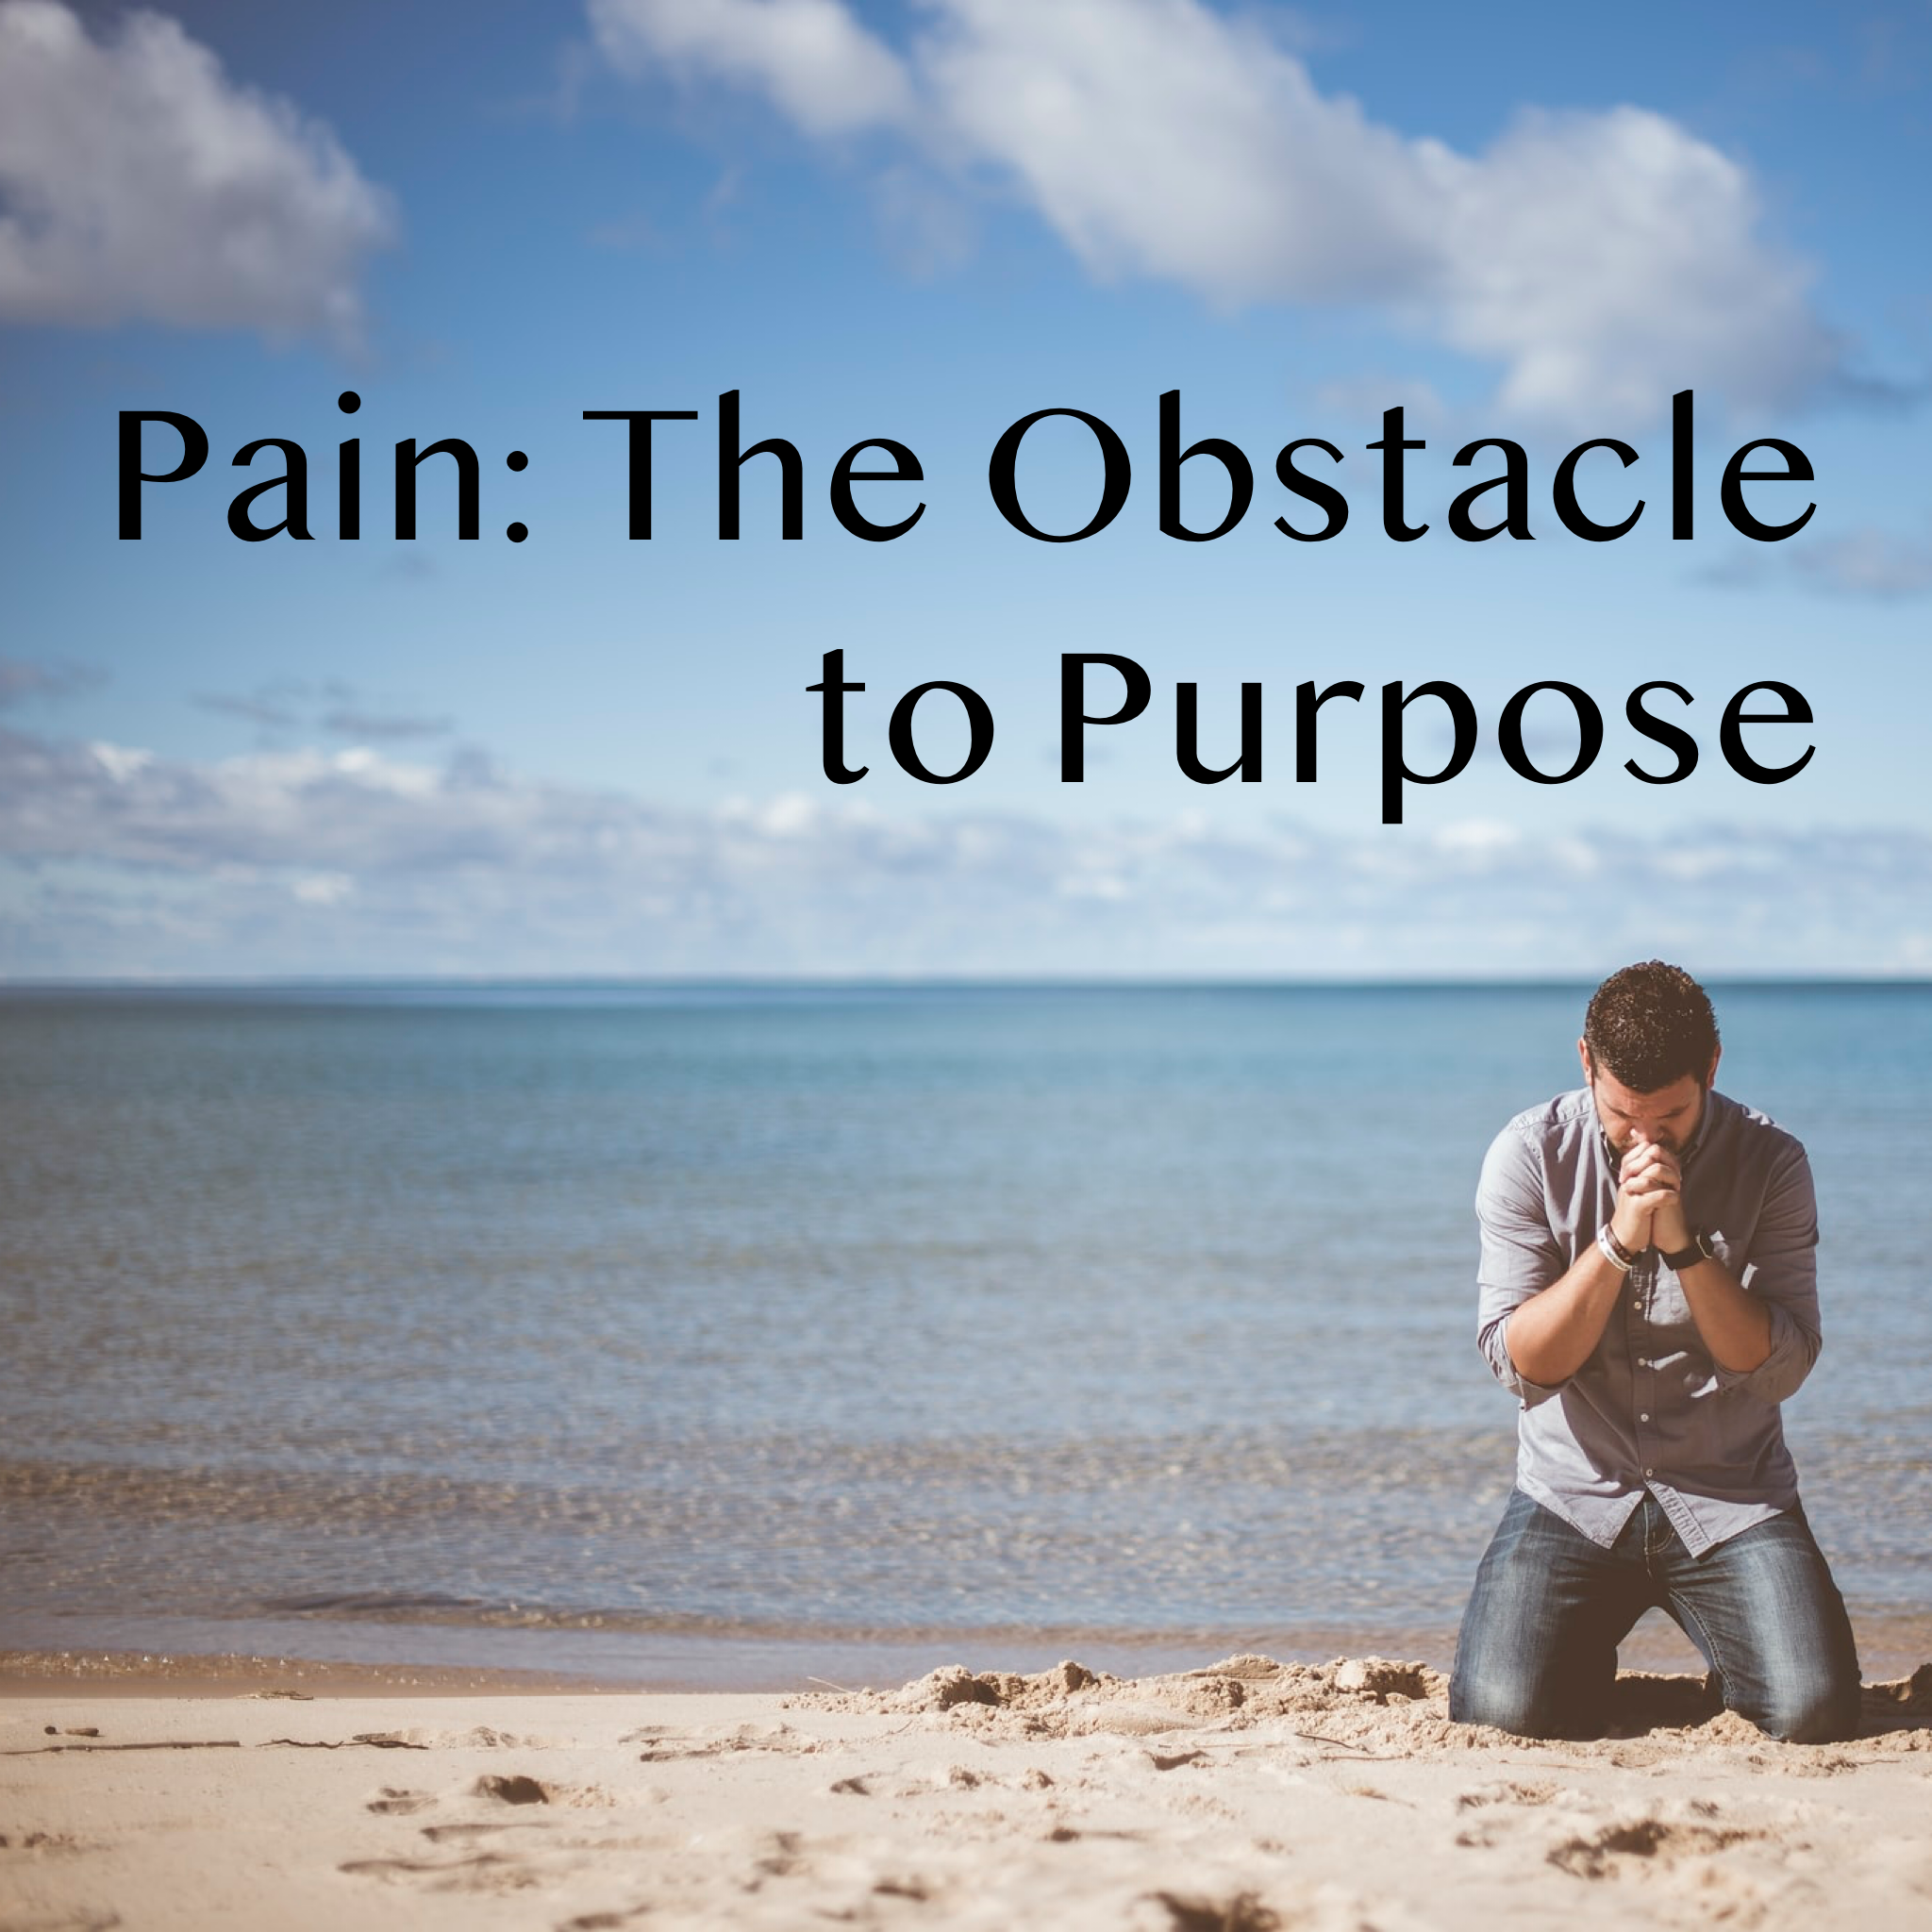 Pain: The Obstacle to Purpose - 6/28/20